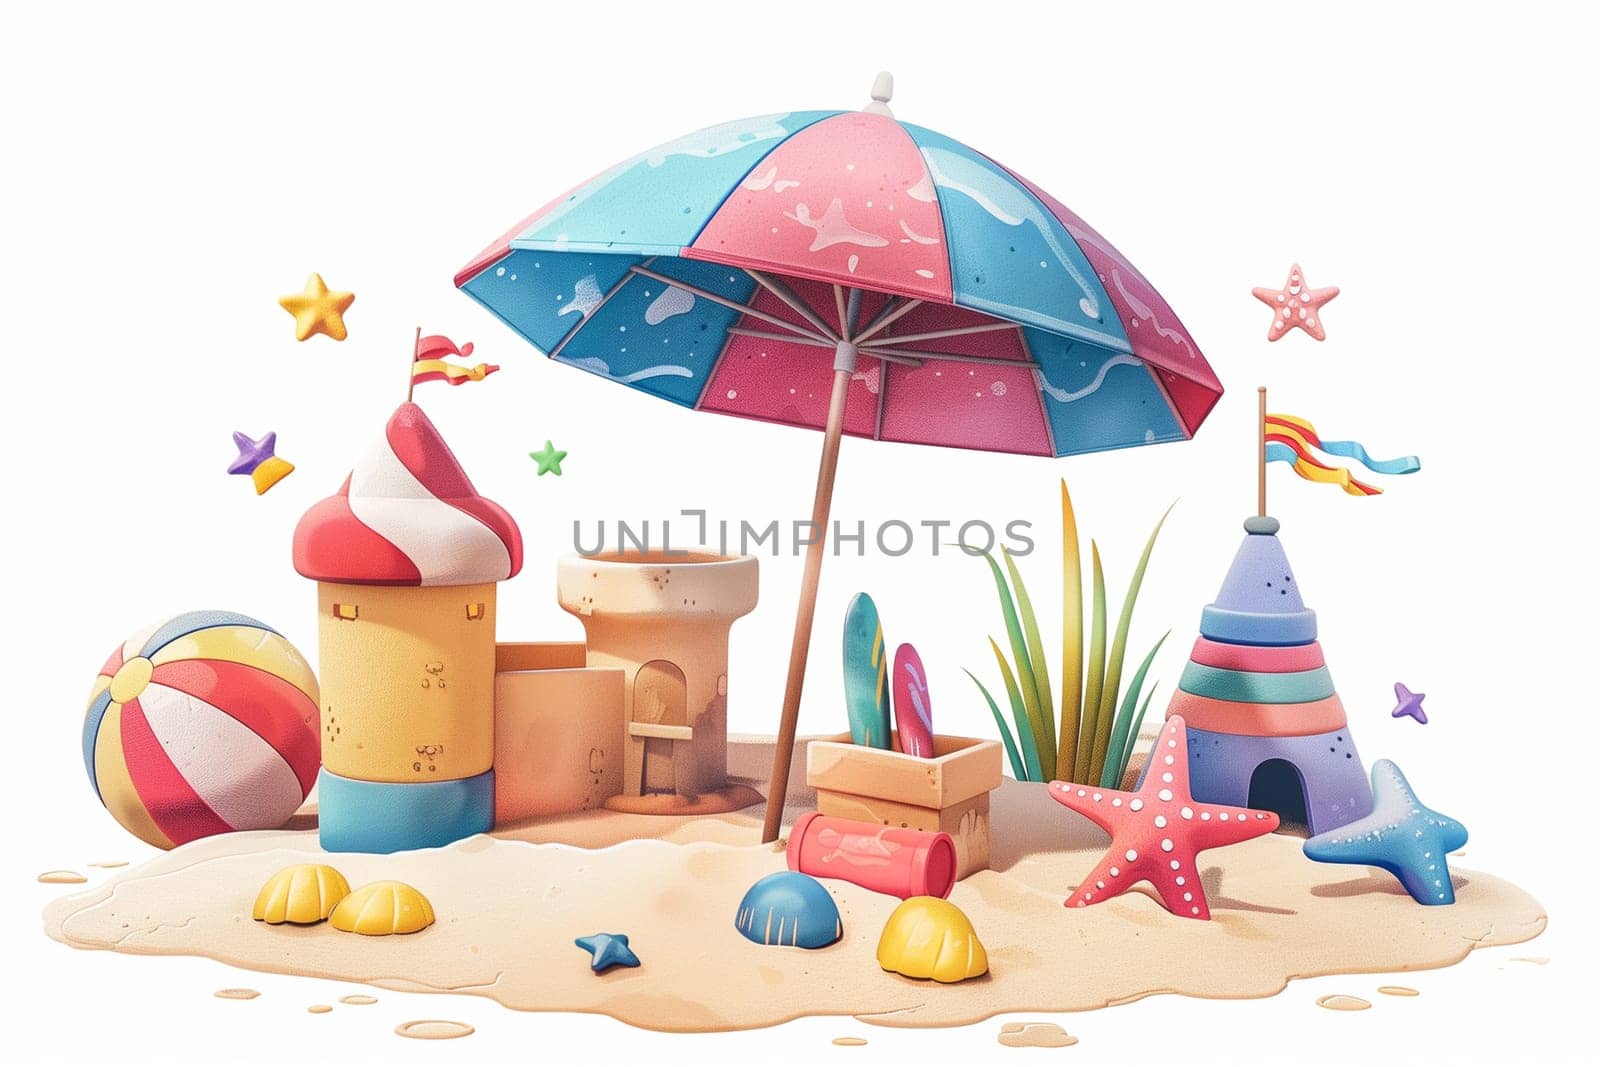 Beach Scene With Sand Castles and Umbrella by Sd28DimoN_1976